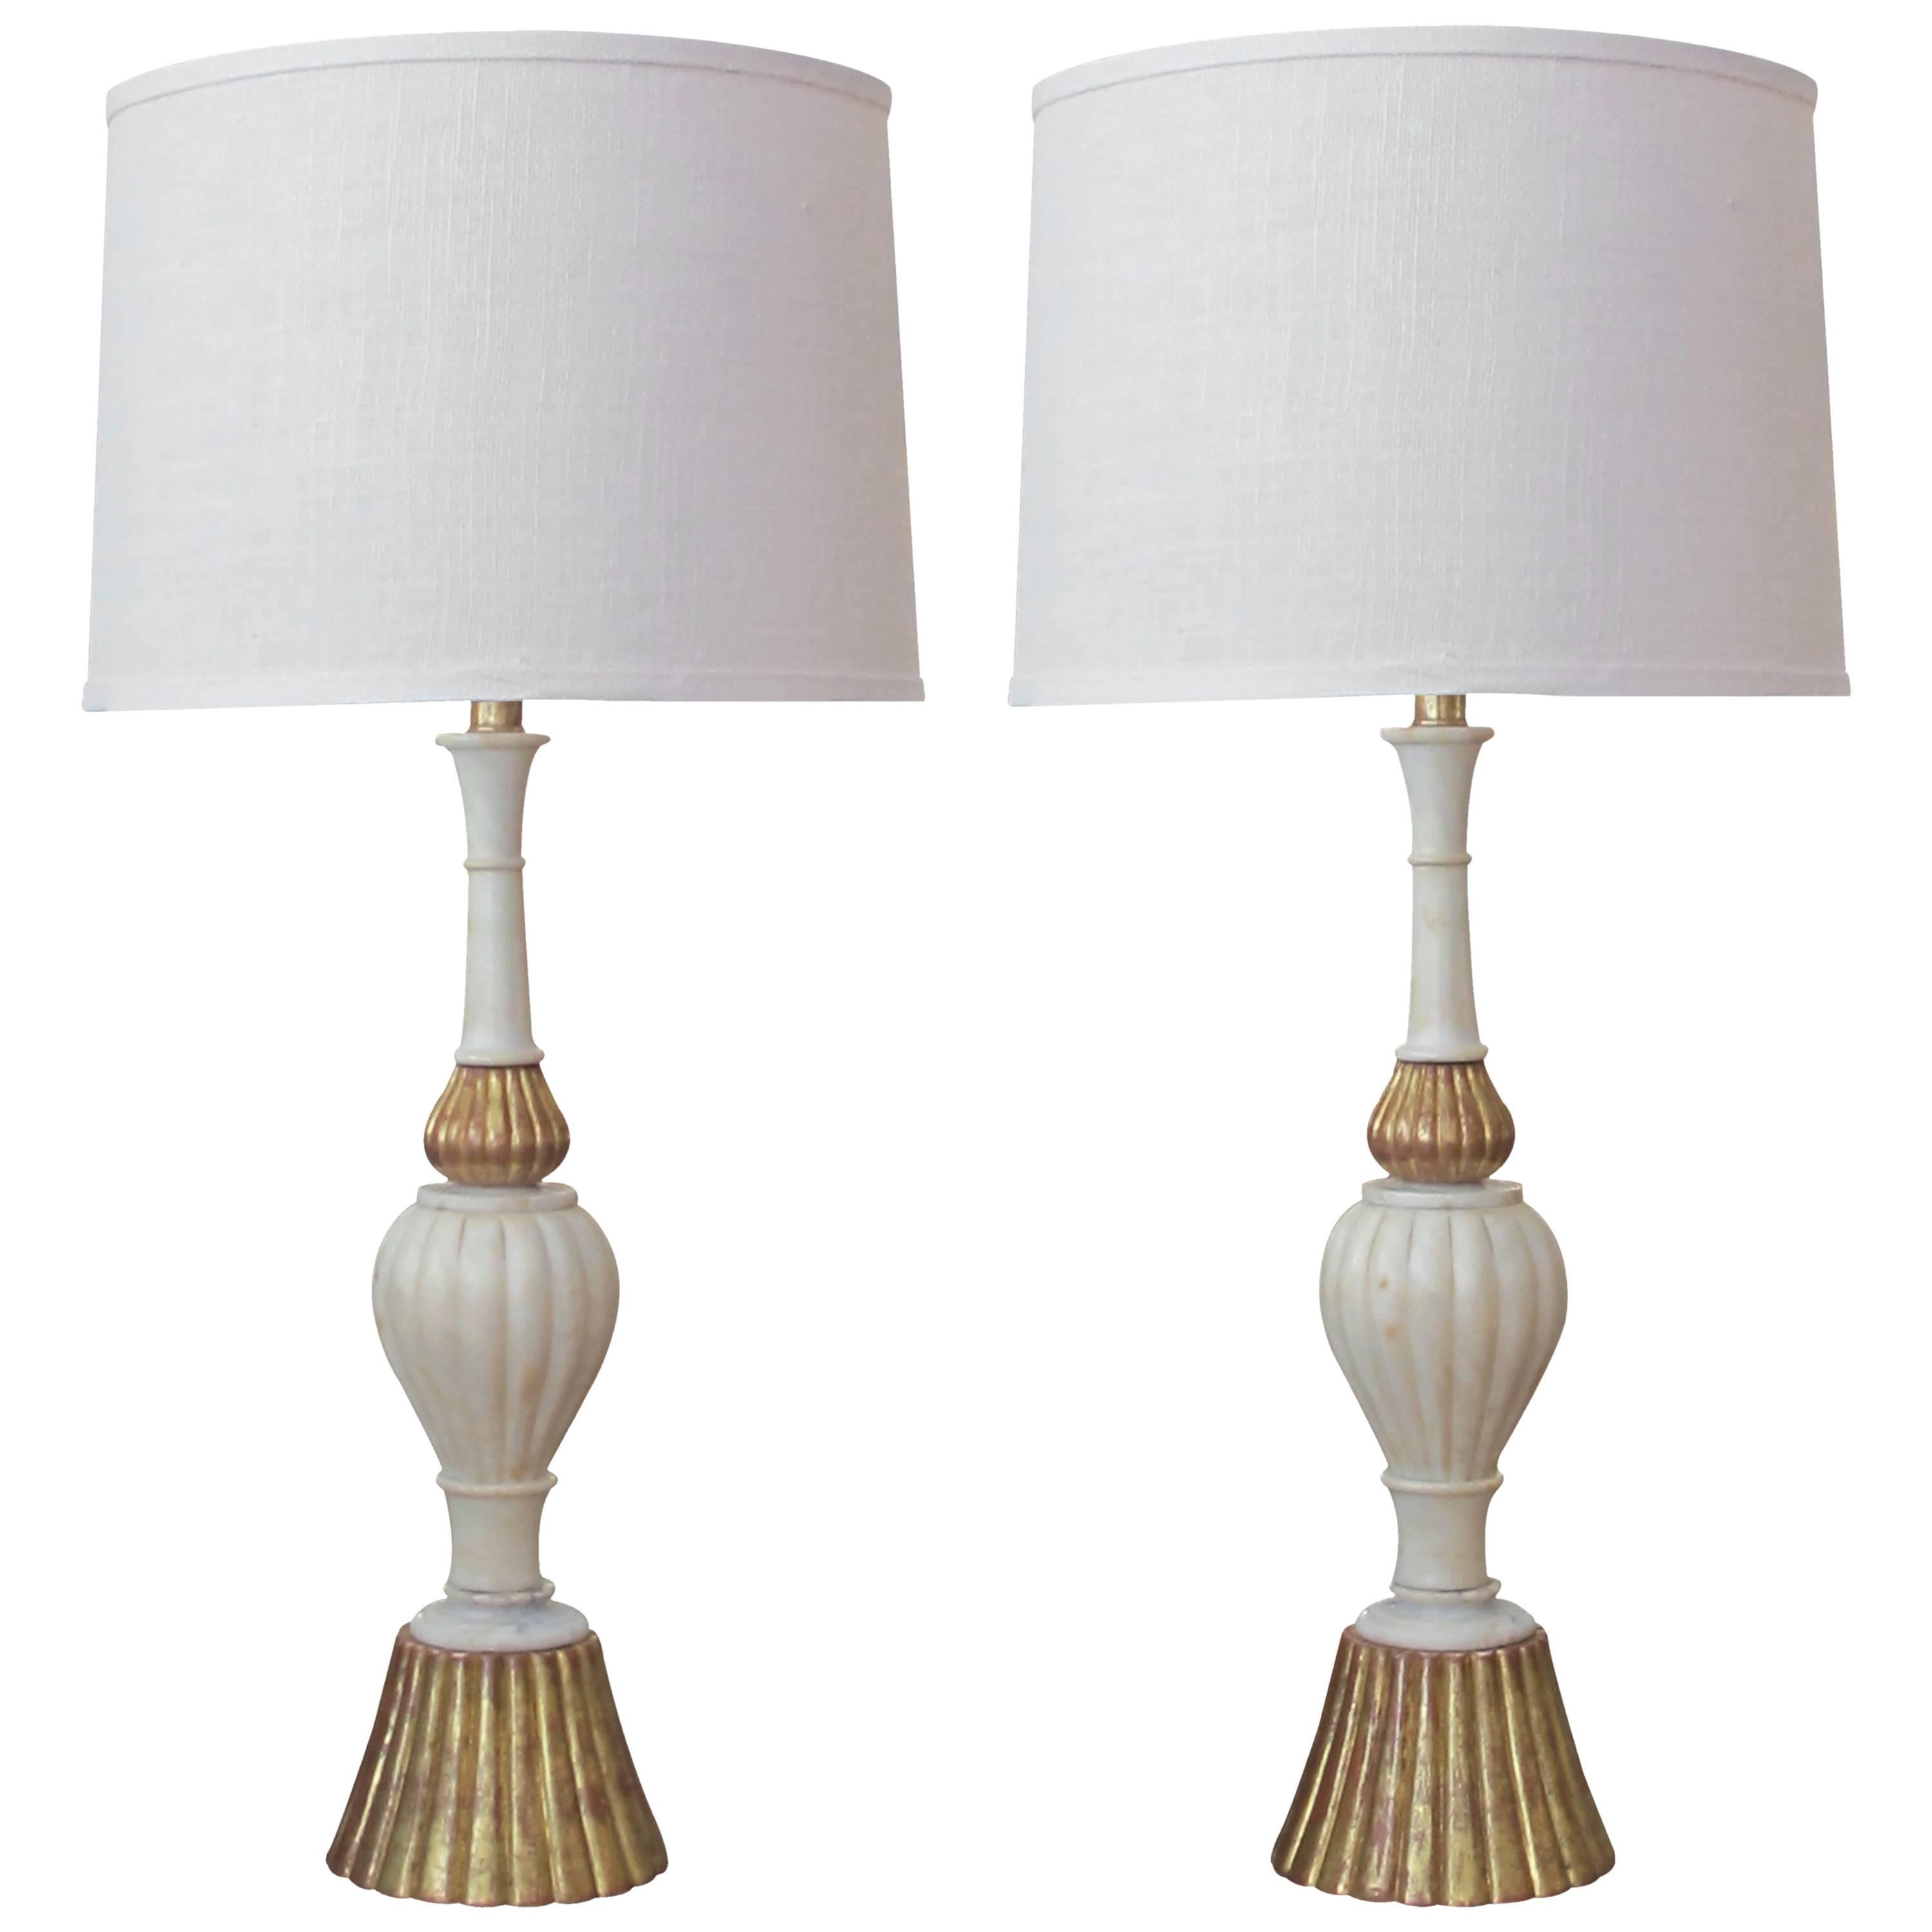 Shapely Pair of Italian Baluster-Form Carrara Marble Lamps with Giltwood Mounts